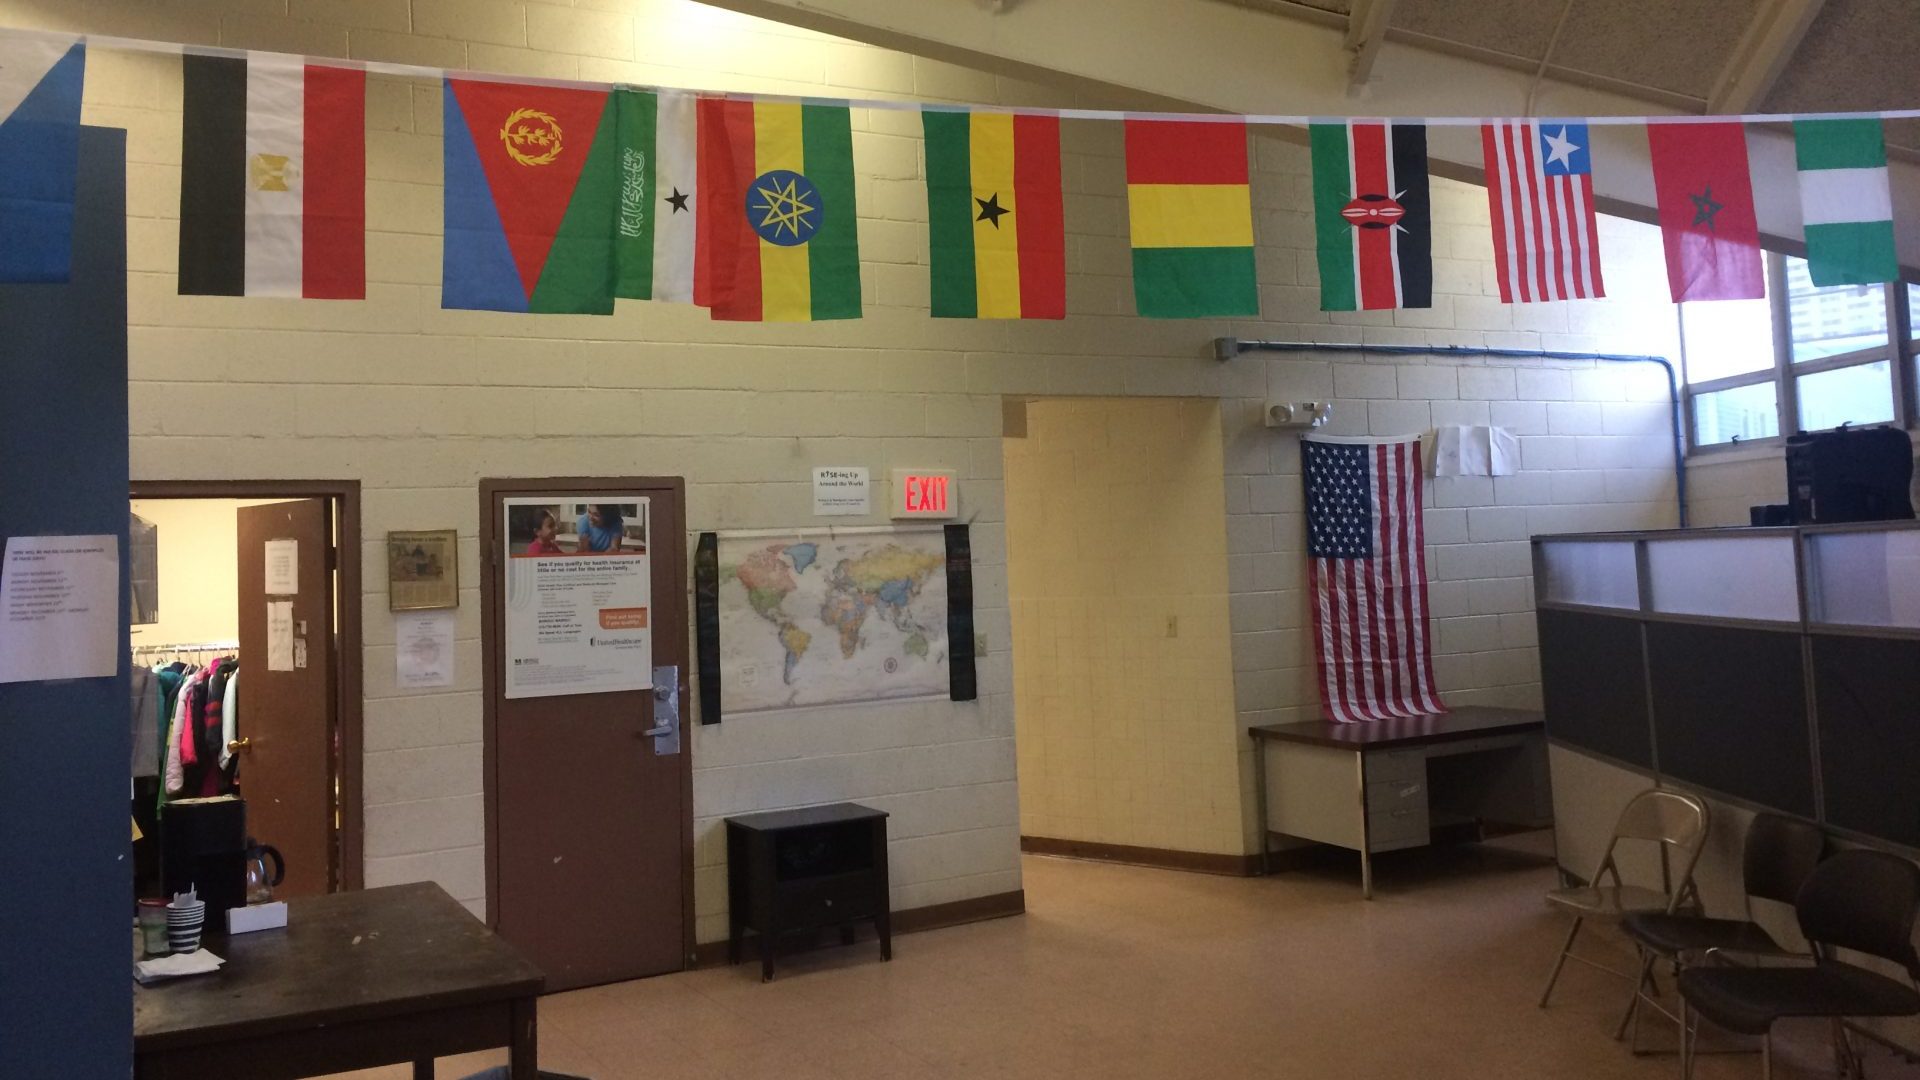 Flags of the nations represented by the refugees and immigrants at RISE